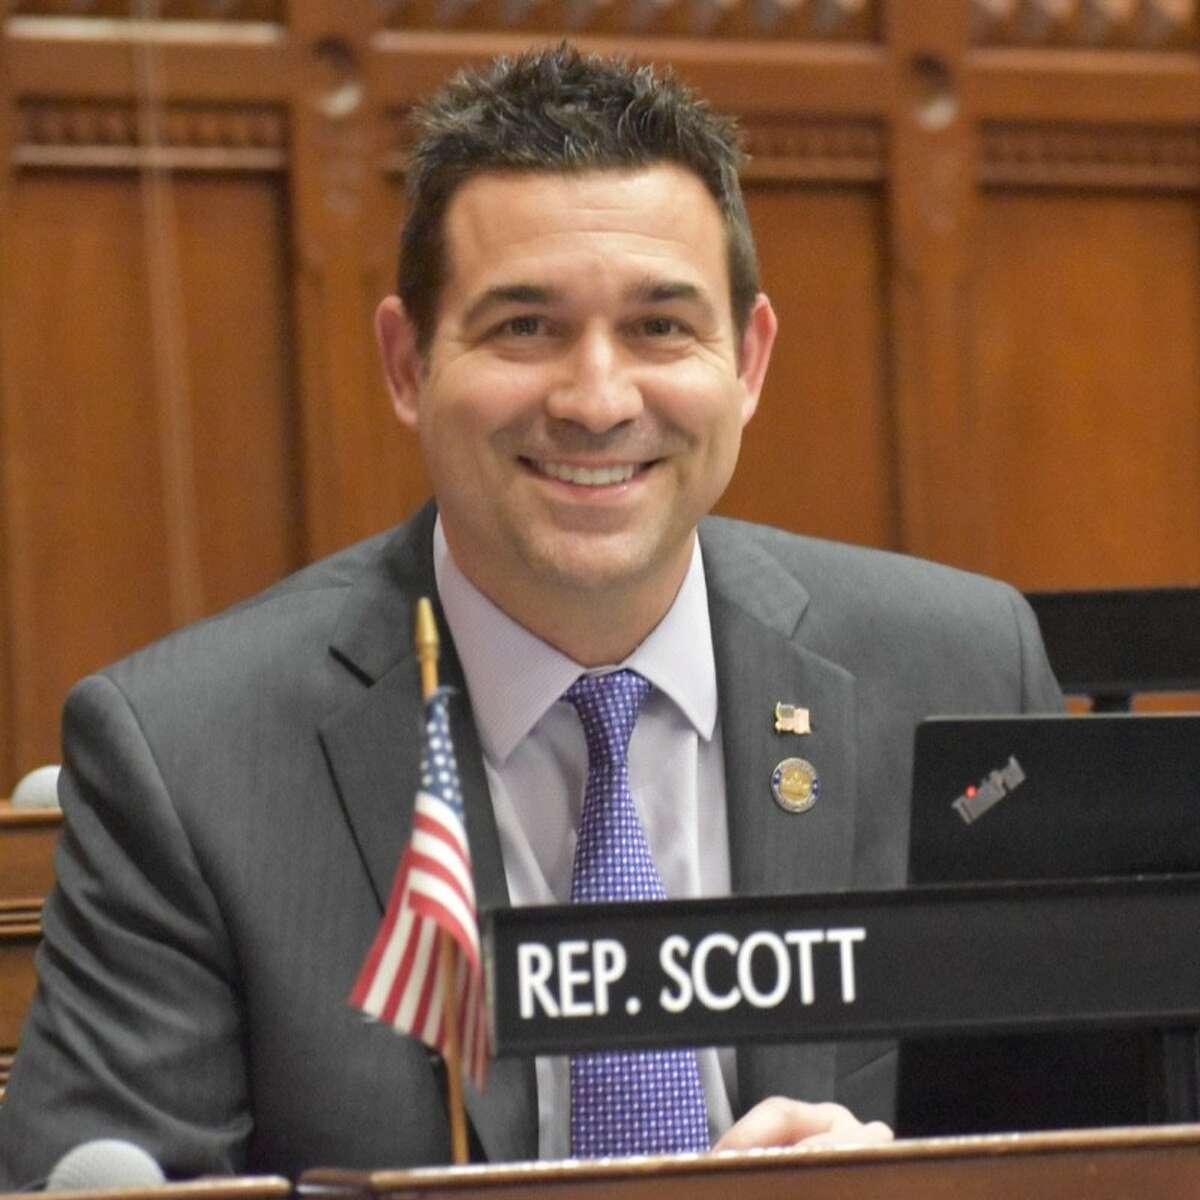 Republican State Rep. Tony Scott is running for reelection in the 112th District.